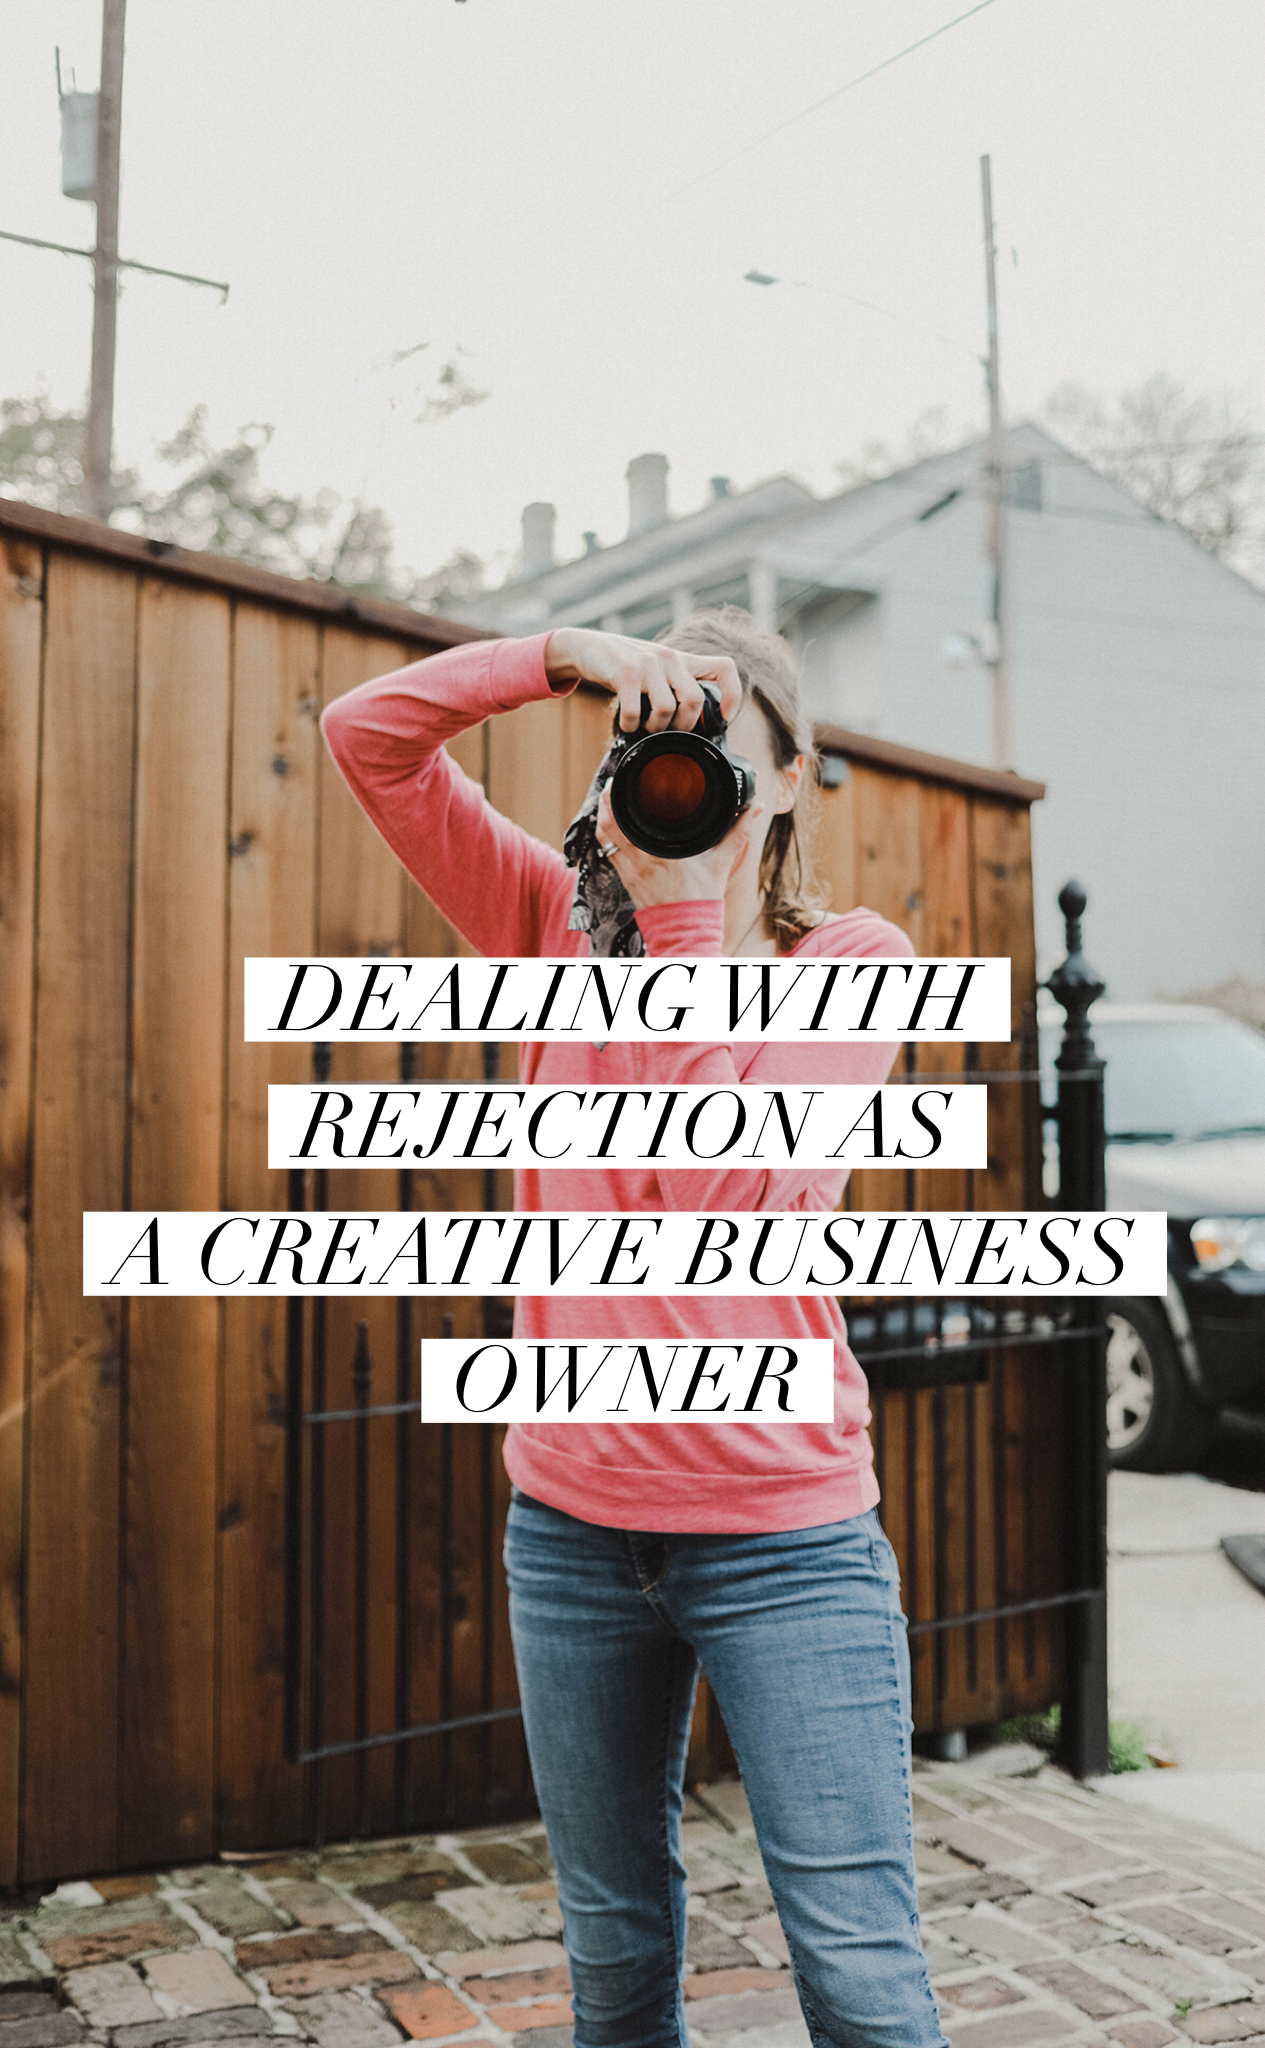 Dealing with rejection as a creative business owner